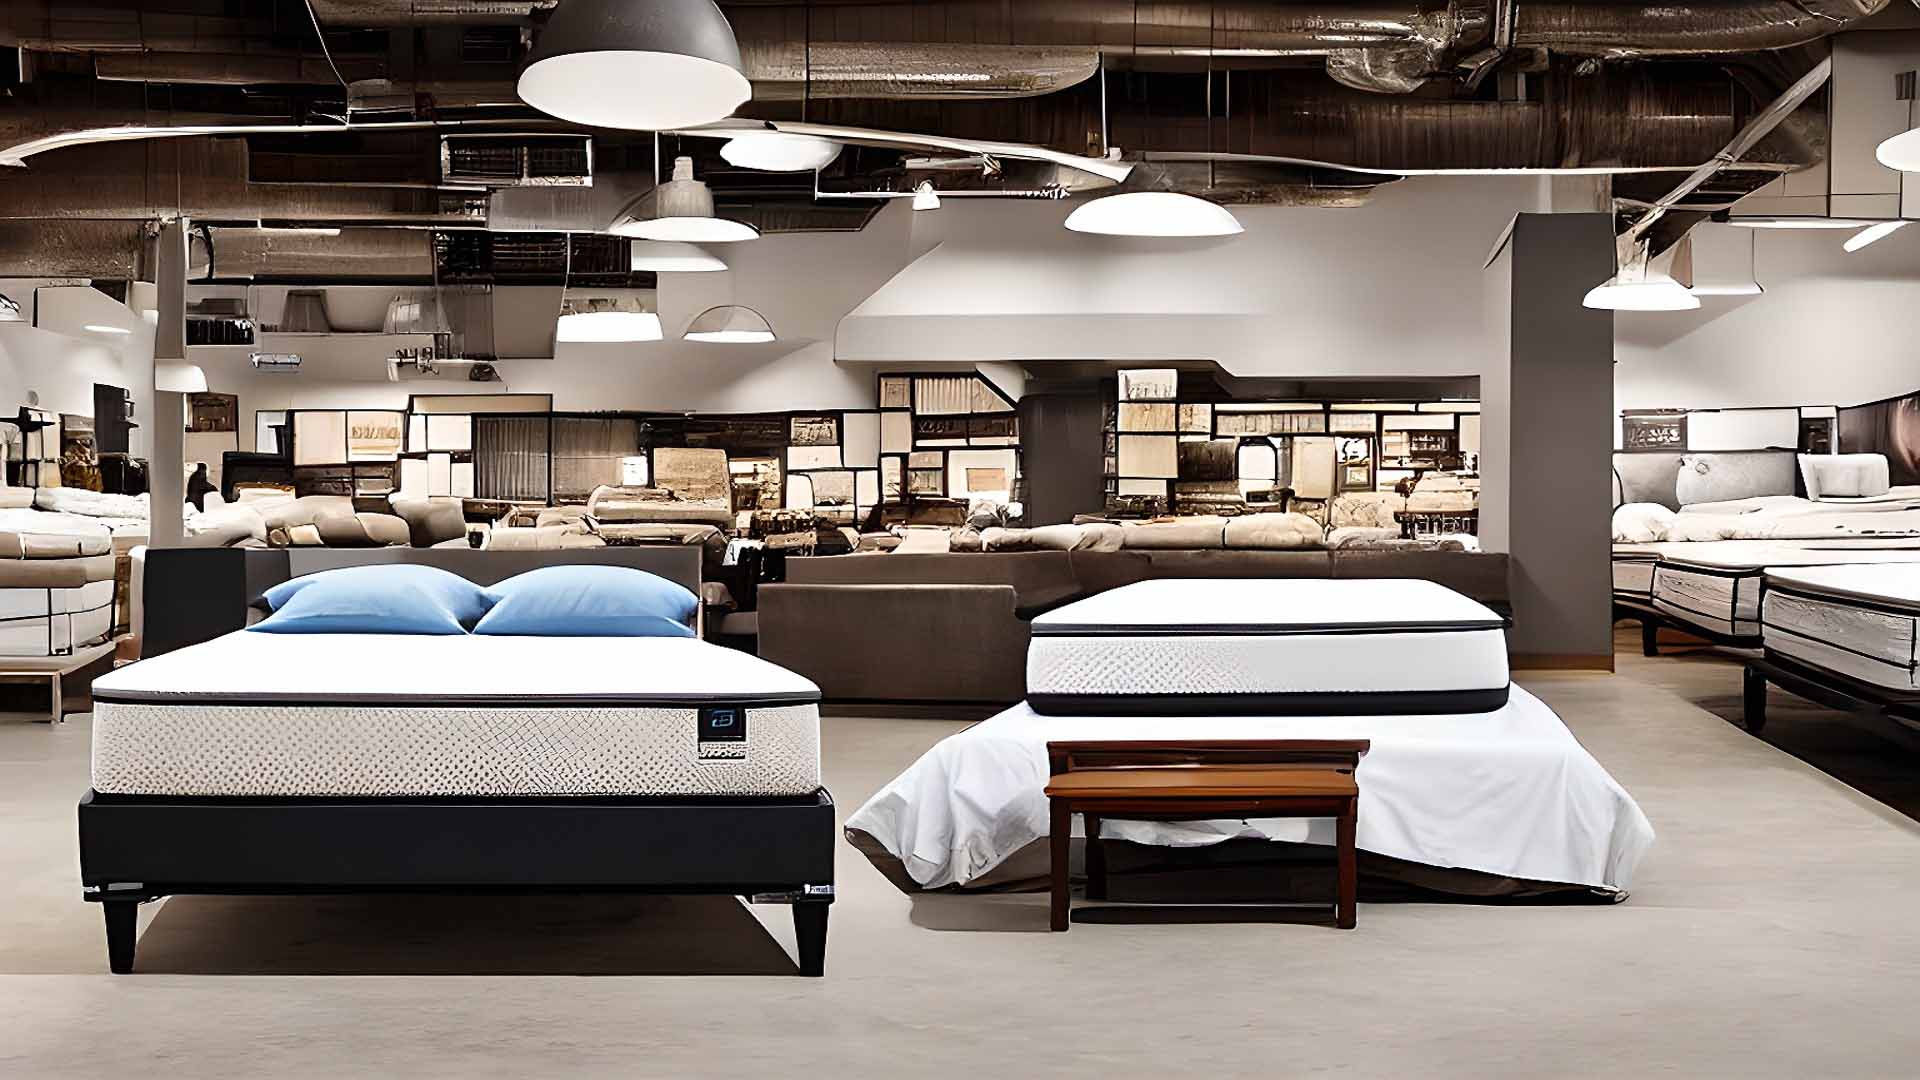 Mattress Outlet Showroom With Queen Beds Fort Worth, TX